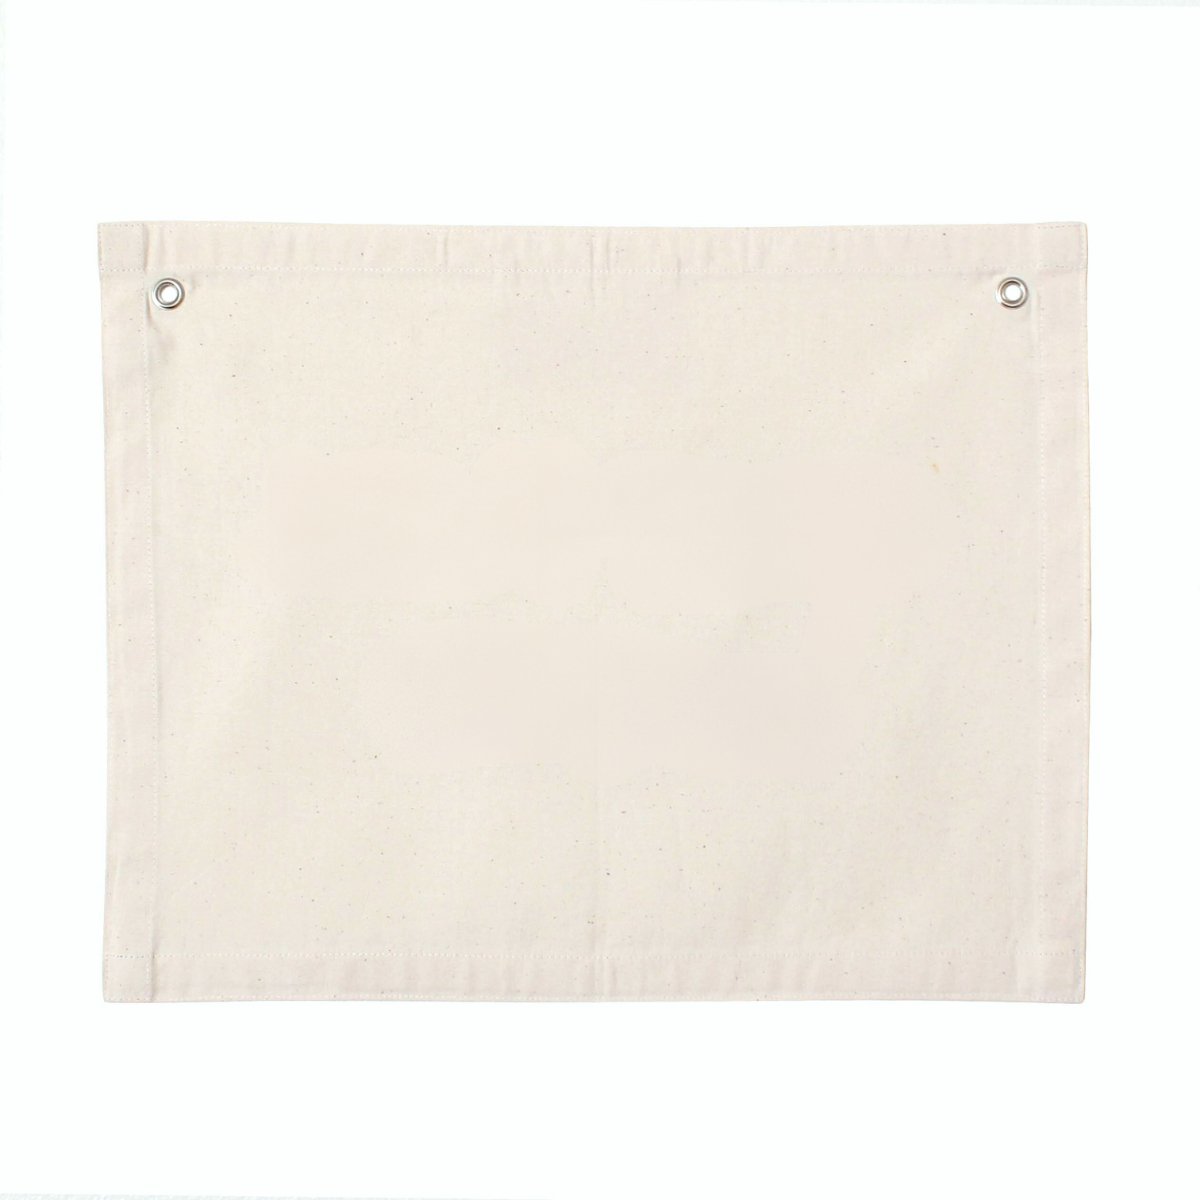 Imani Collective Blank Canvas Banner, Large - lily & onyx